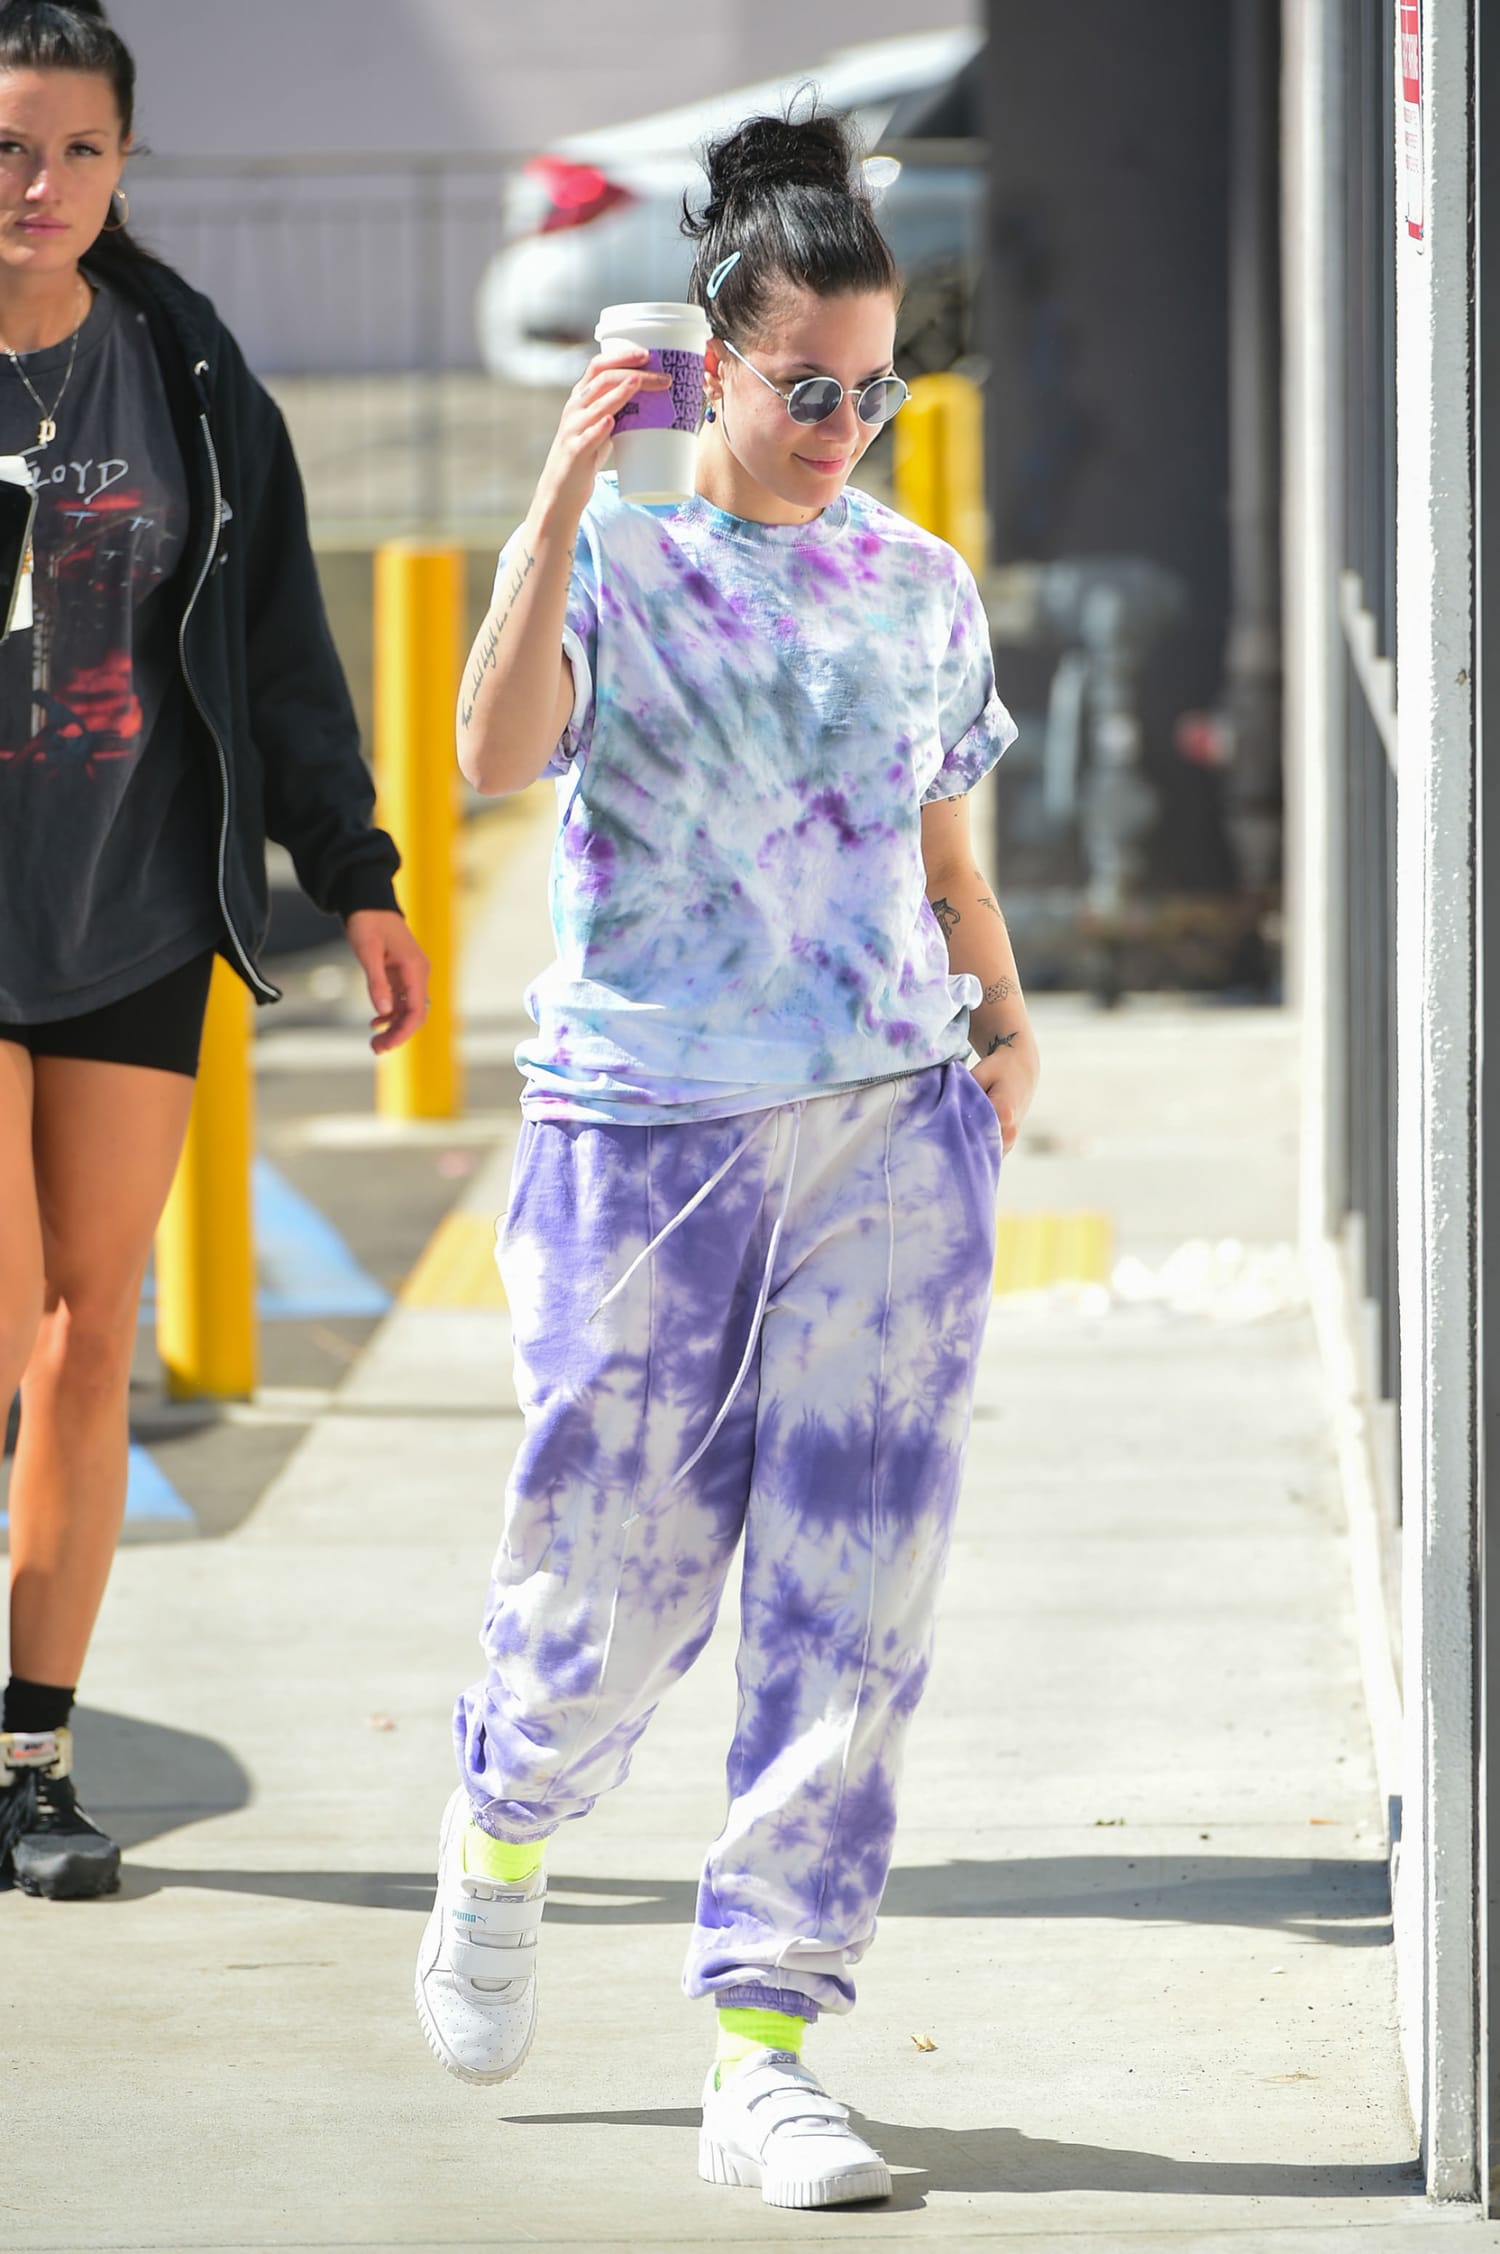 Is Tie Dye Going Out of Style 